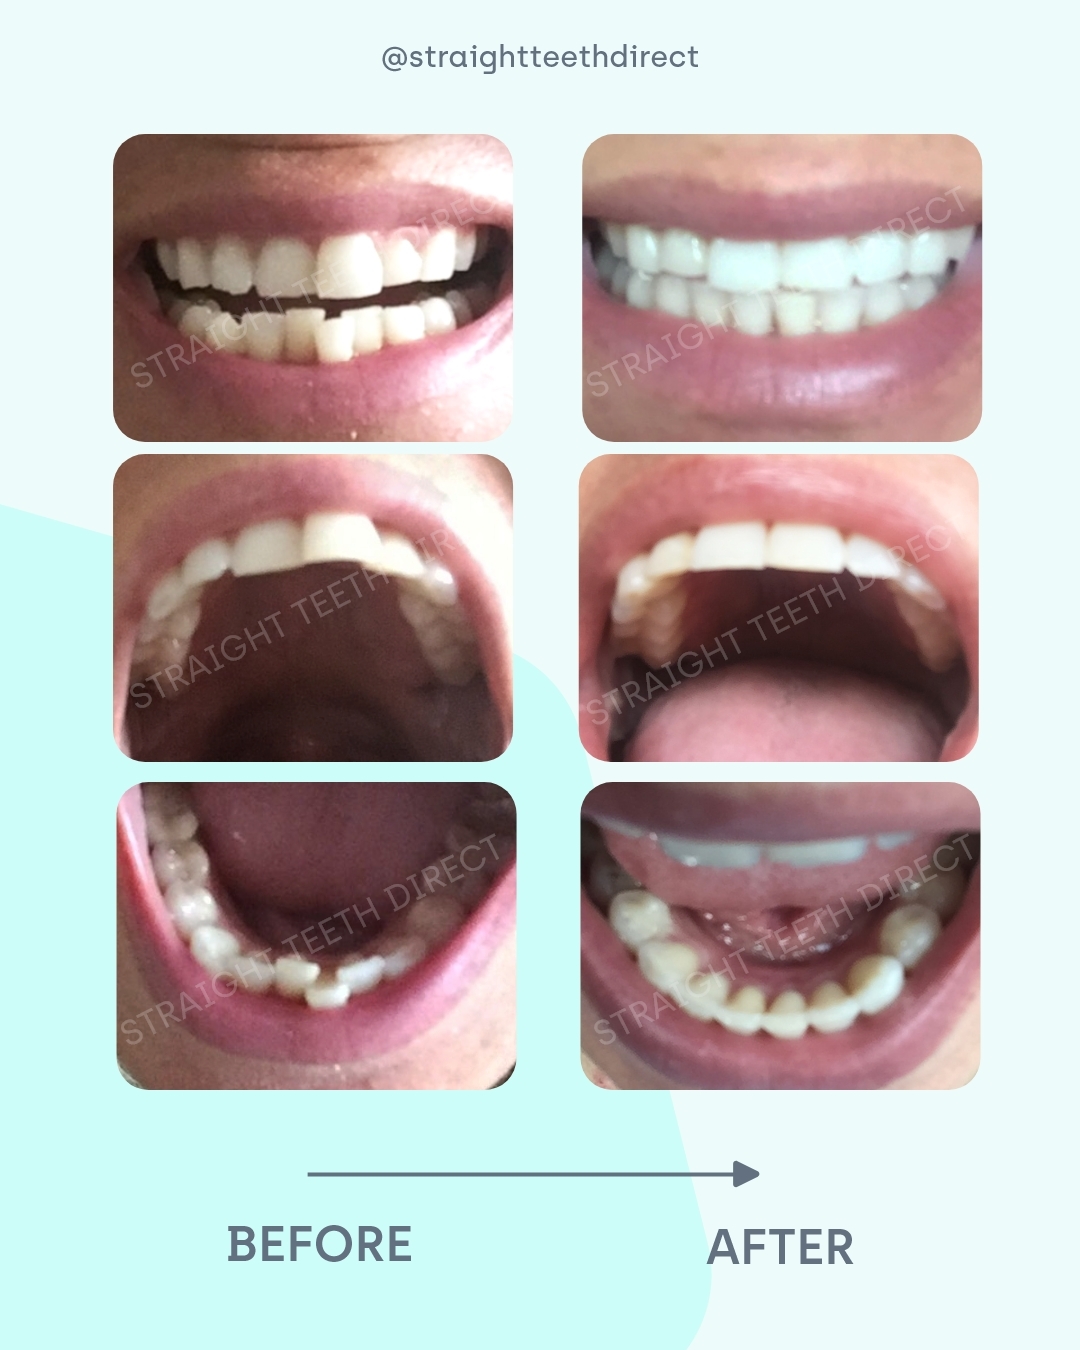 Katie before and after clear aligners while pregnant